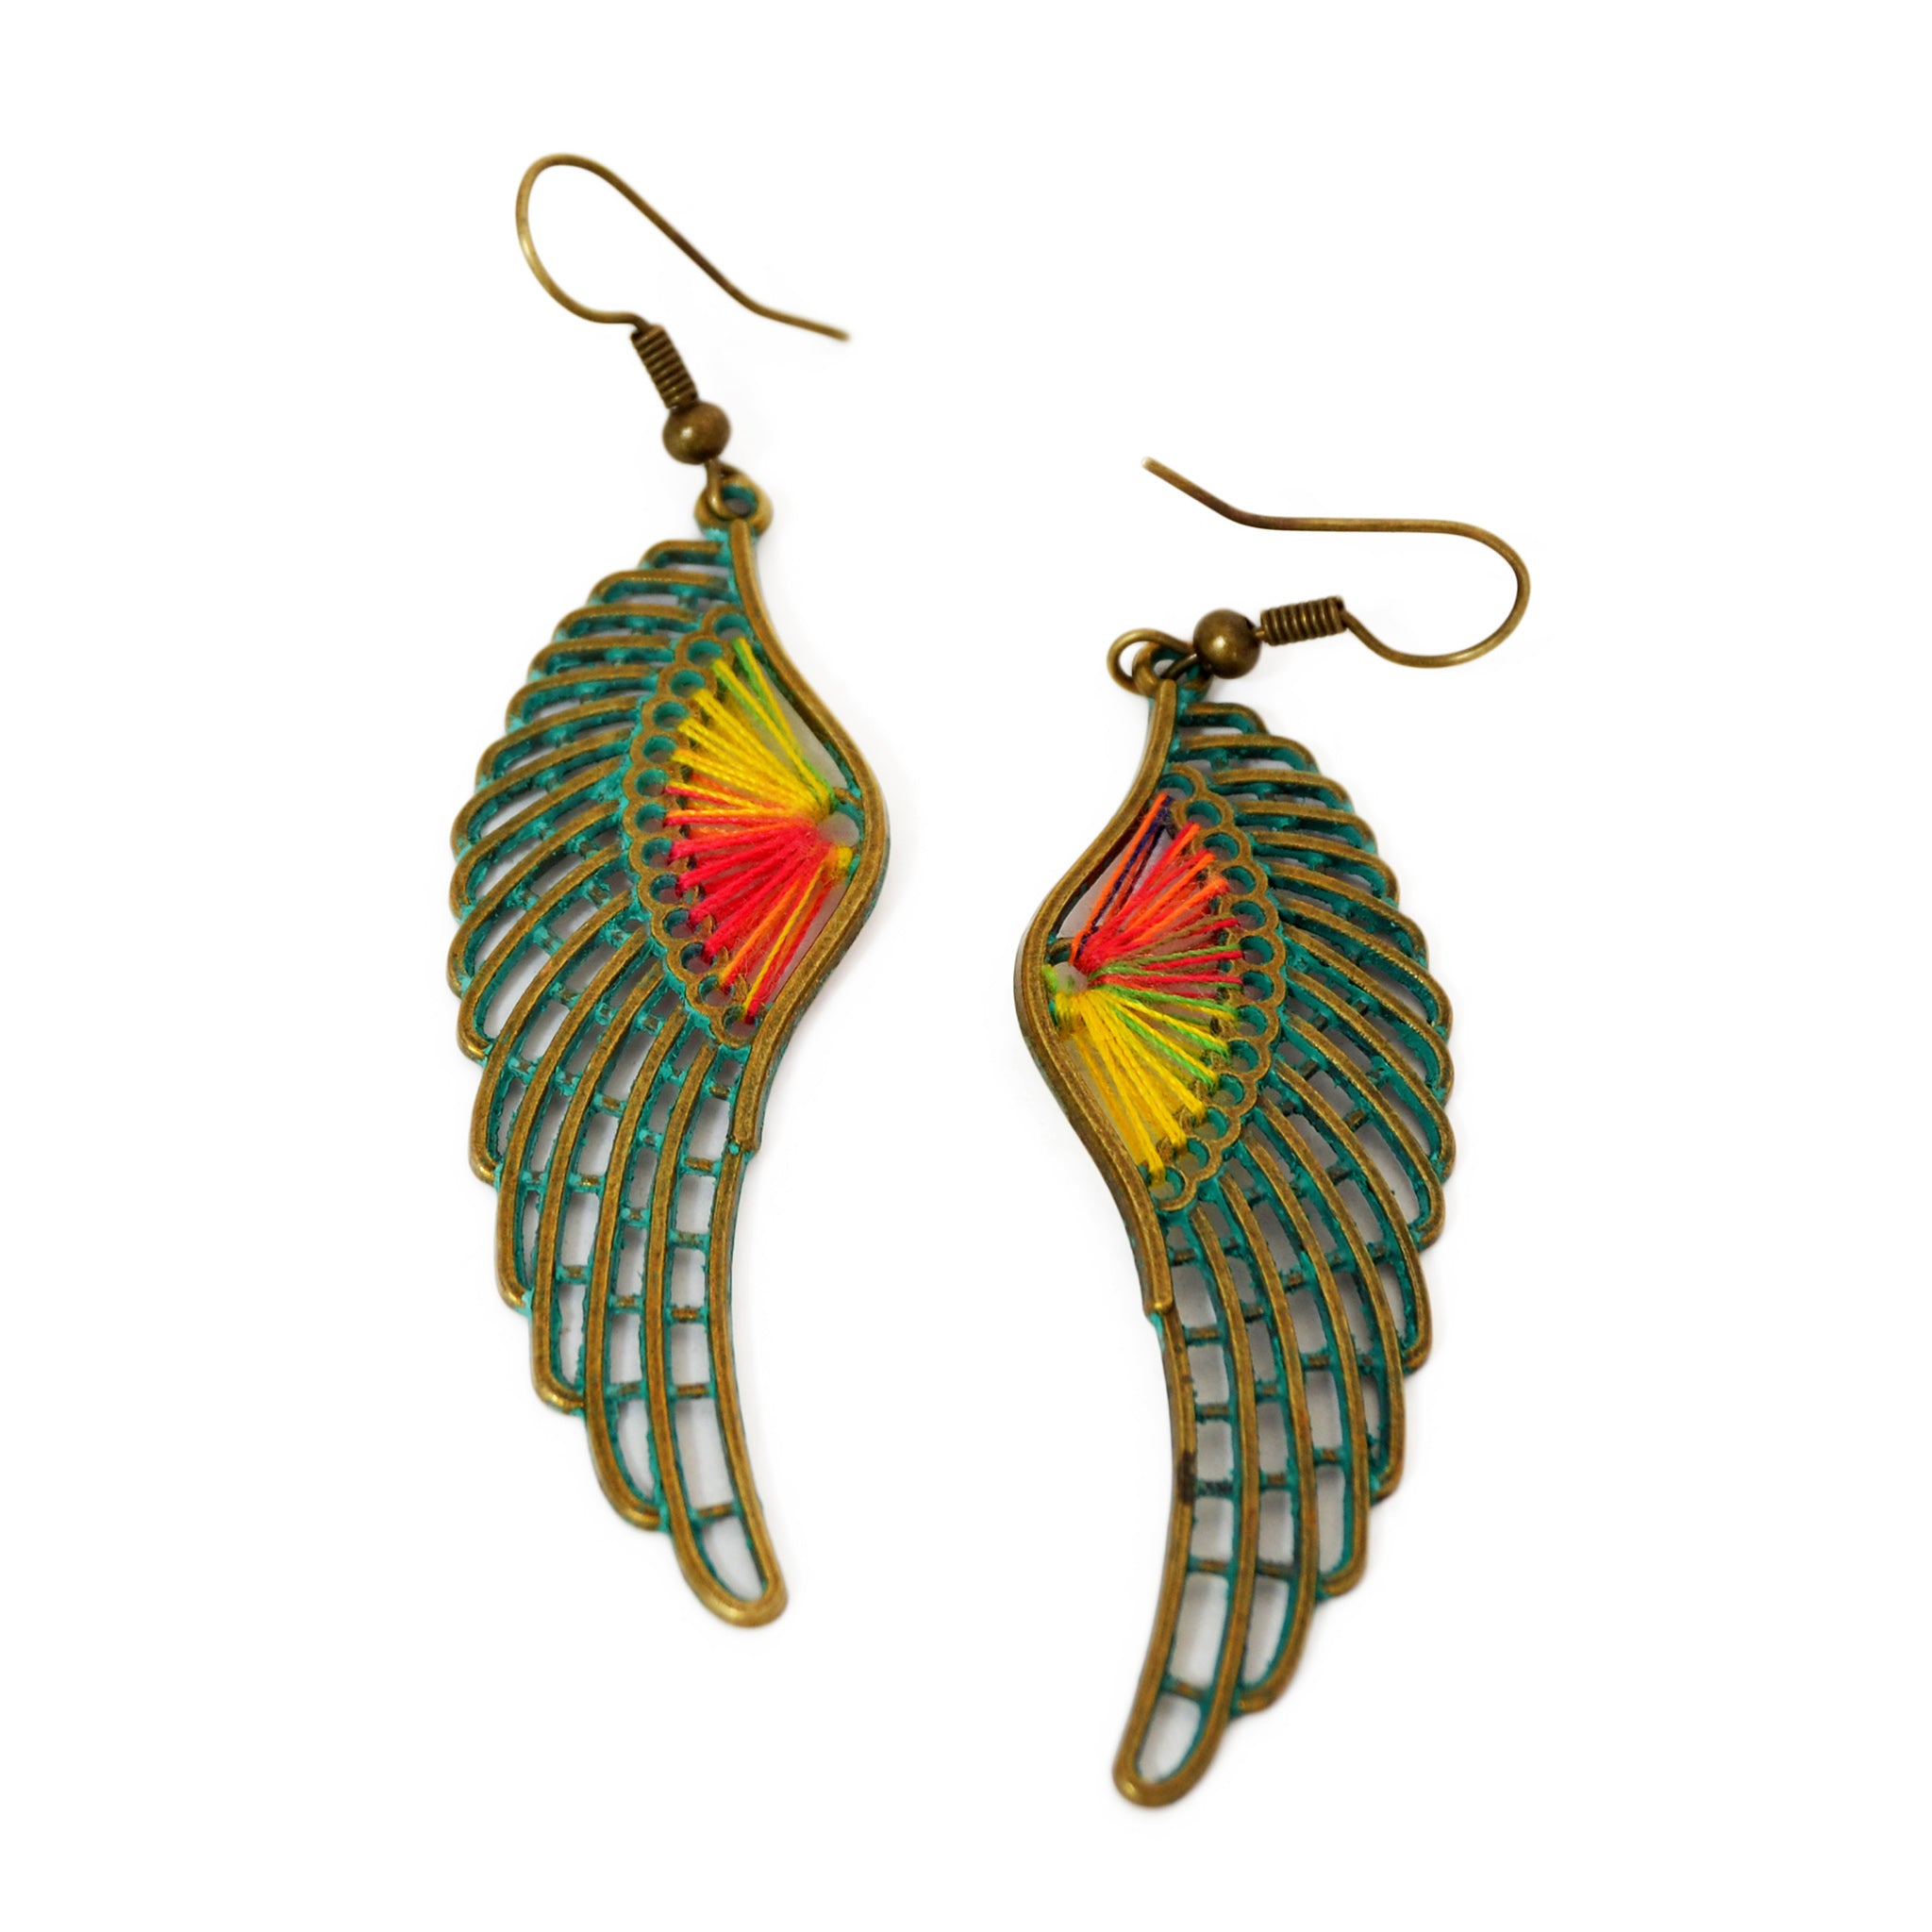 Wing earrings with colored threads and aged green patina on brass